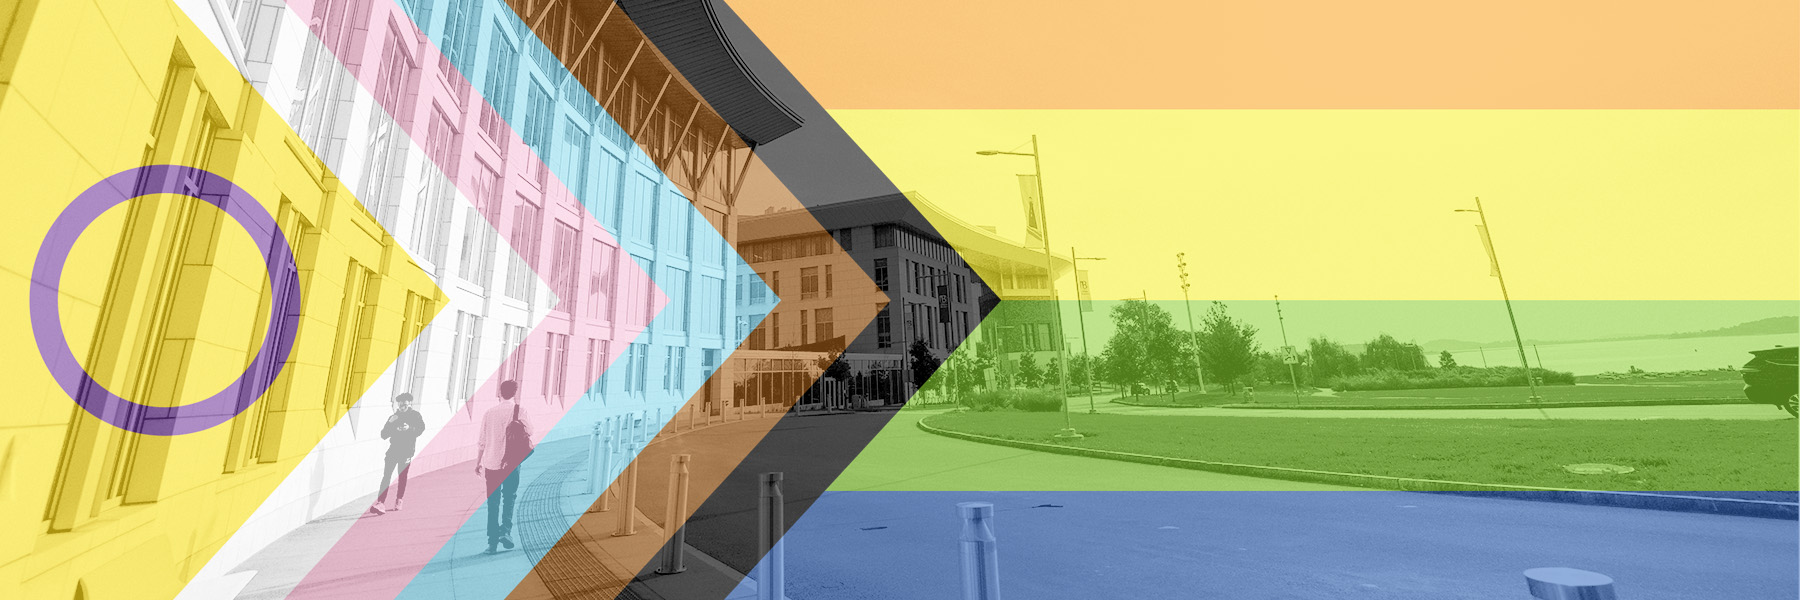 Photo illustration of UMass Boston's Campus Center and University Hall with an updated Pride flag overlay